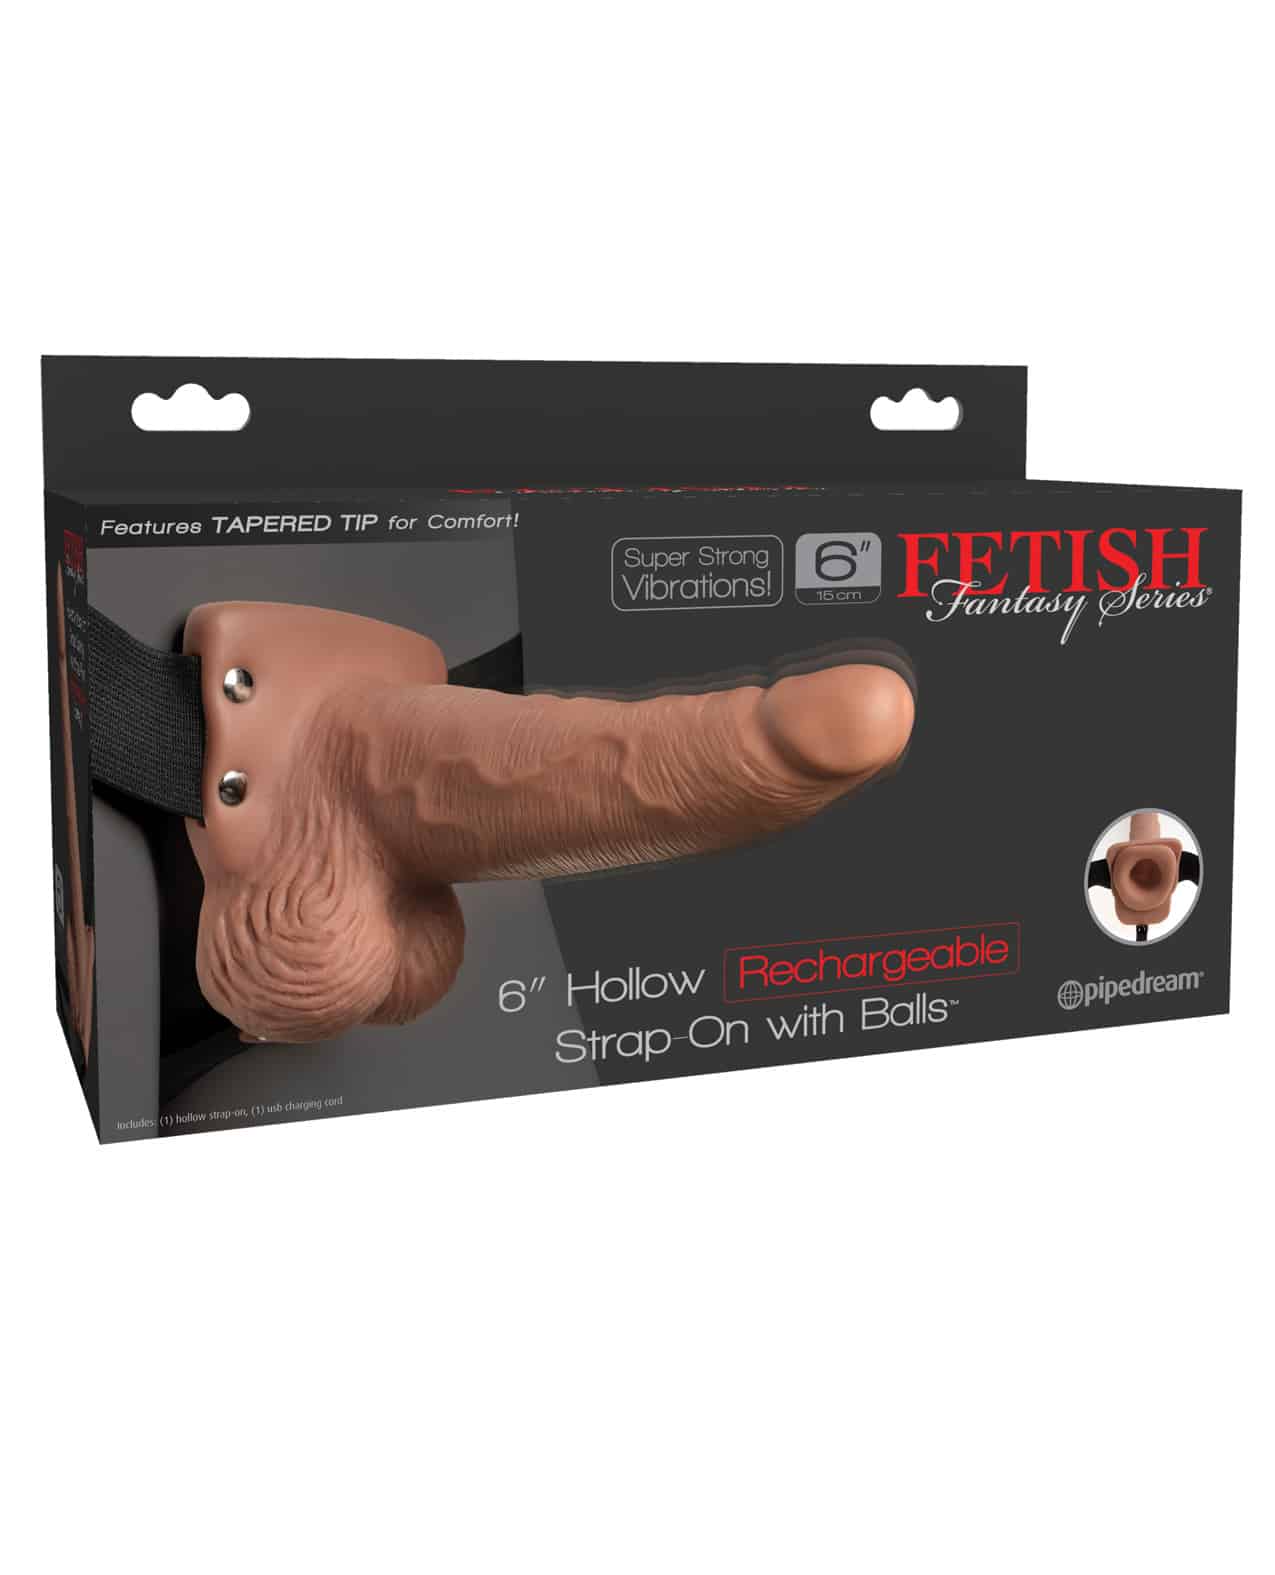 With silicone vibrating dildo